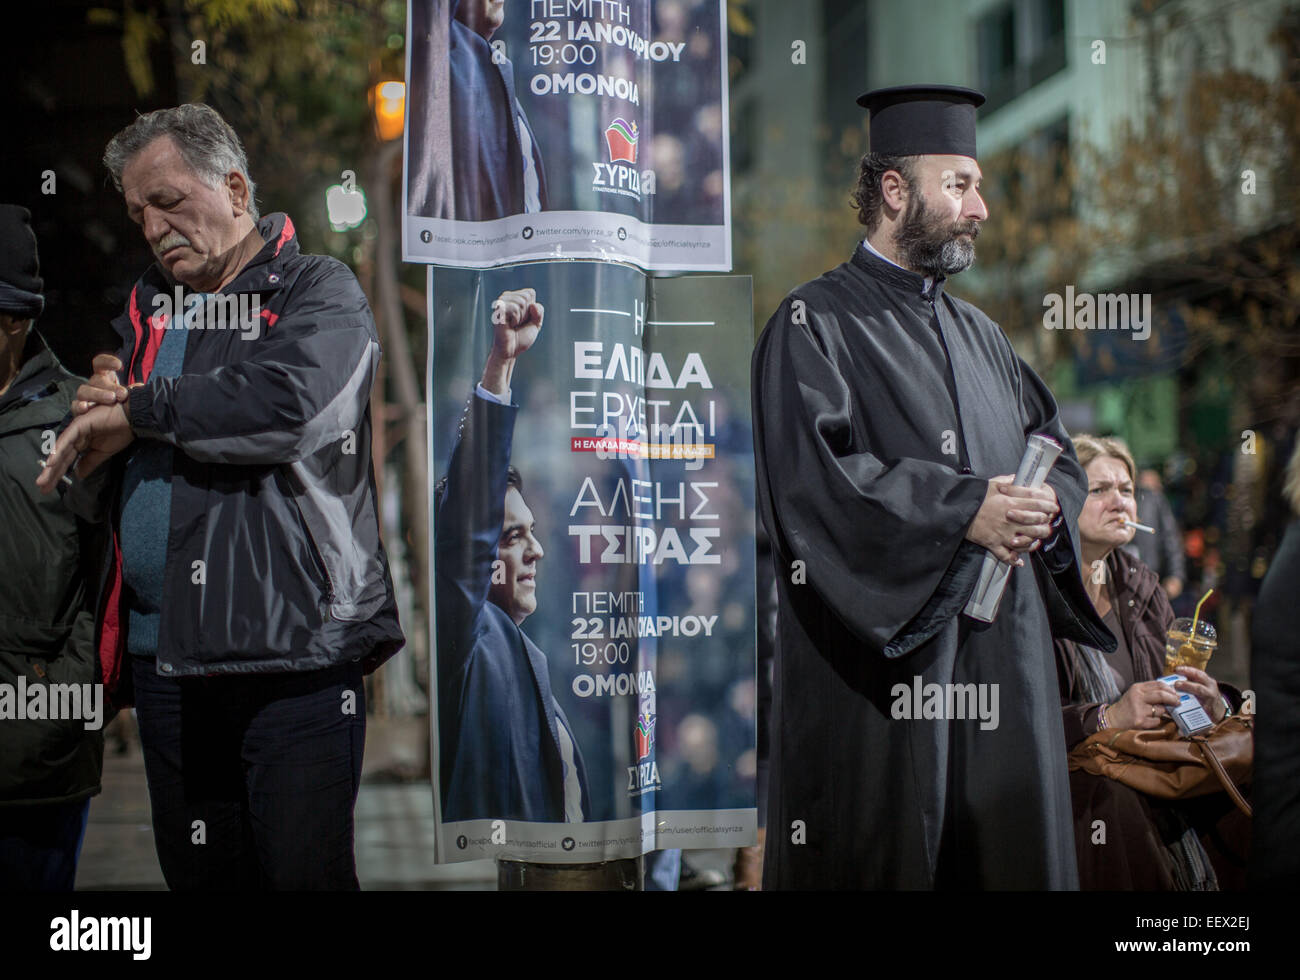 A priest is pictured next to a poster of Alexis Tsipras, leader of the radical left main opposition party SYRIZA in Athens, 22 January prior to the last preelection rally. Greece's leftist, anti-austerity Syriza party has widened its lead at the top for the 25 January 2015 elections. Michael Kappeler/dpa (zu dpa 'Vor griechischer Schicksalswahl Linkspartei deutlich vorn' am 22.01.2015) Stock Photo